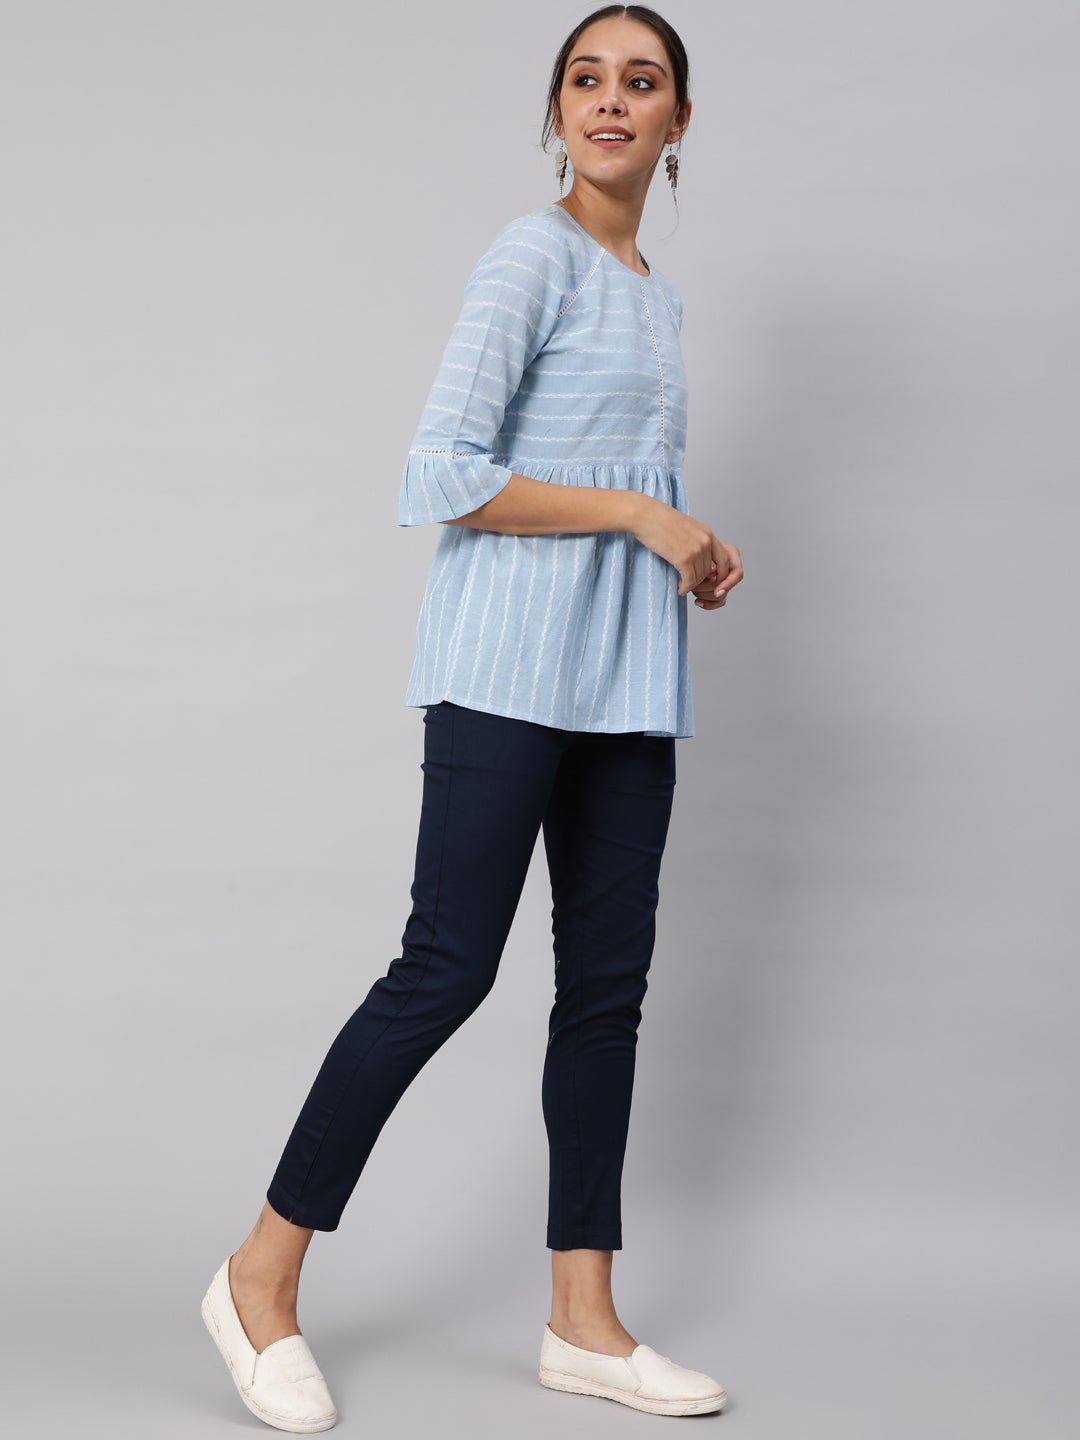 Light Blue Striped Empire Cotton Top and Pants